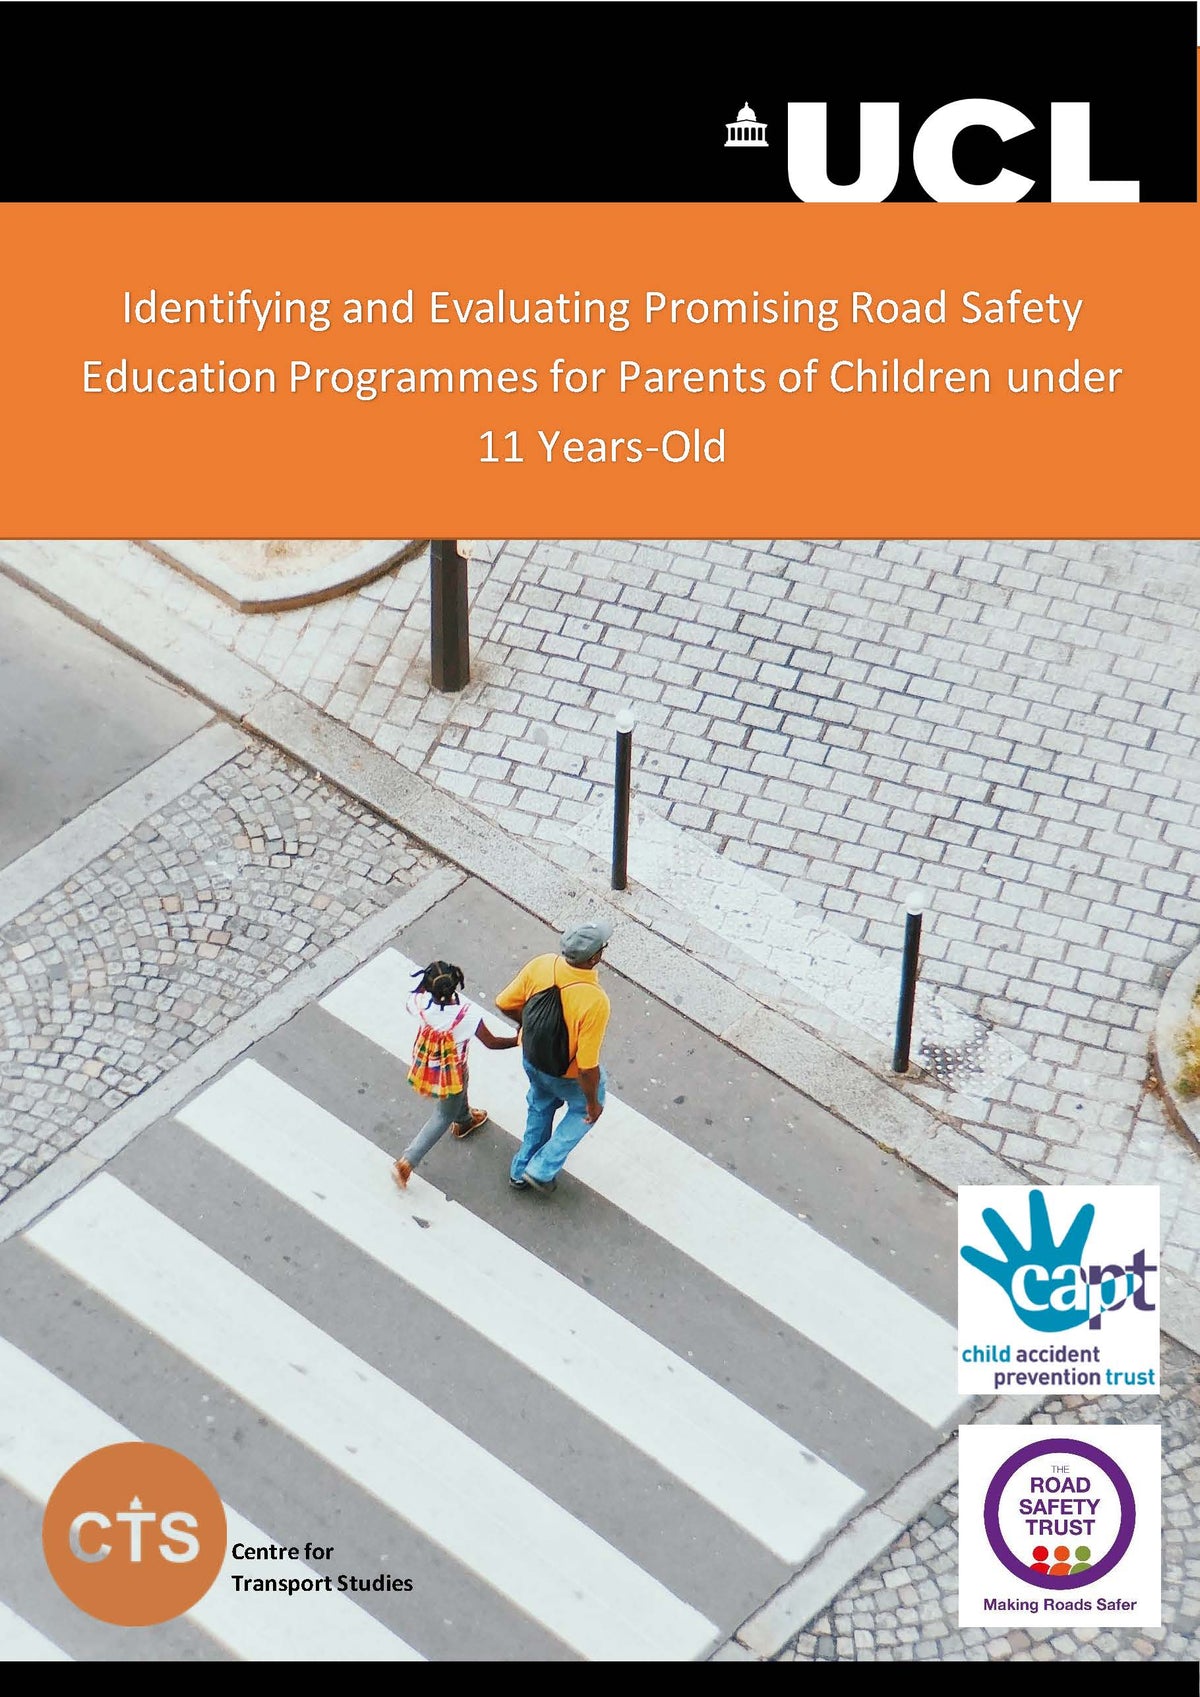 On-Line Road Safety Education for Children 